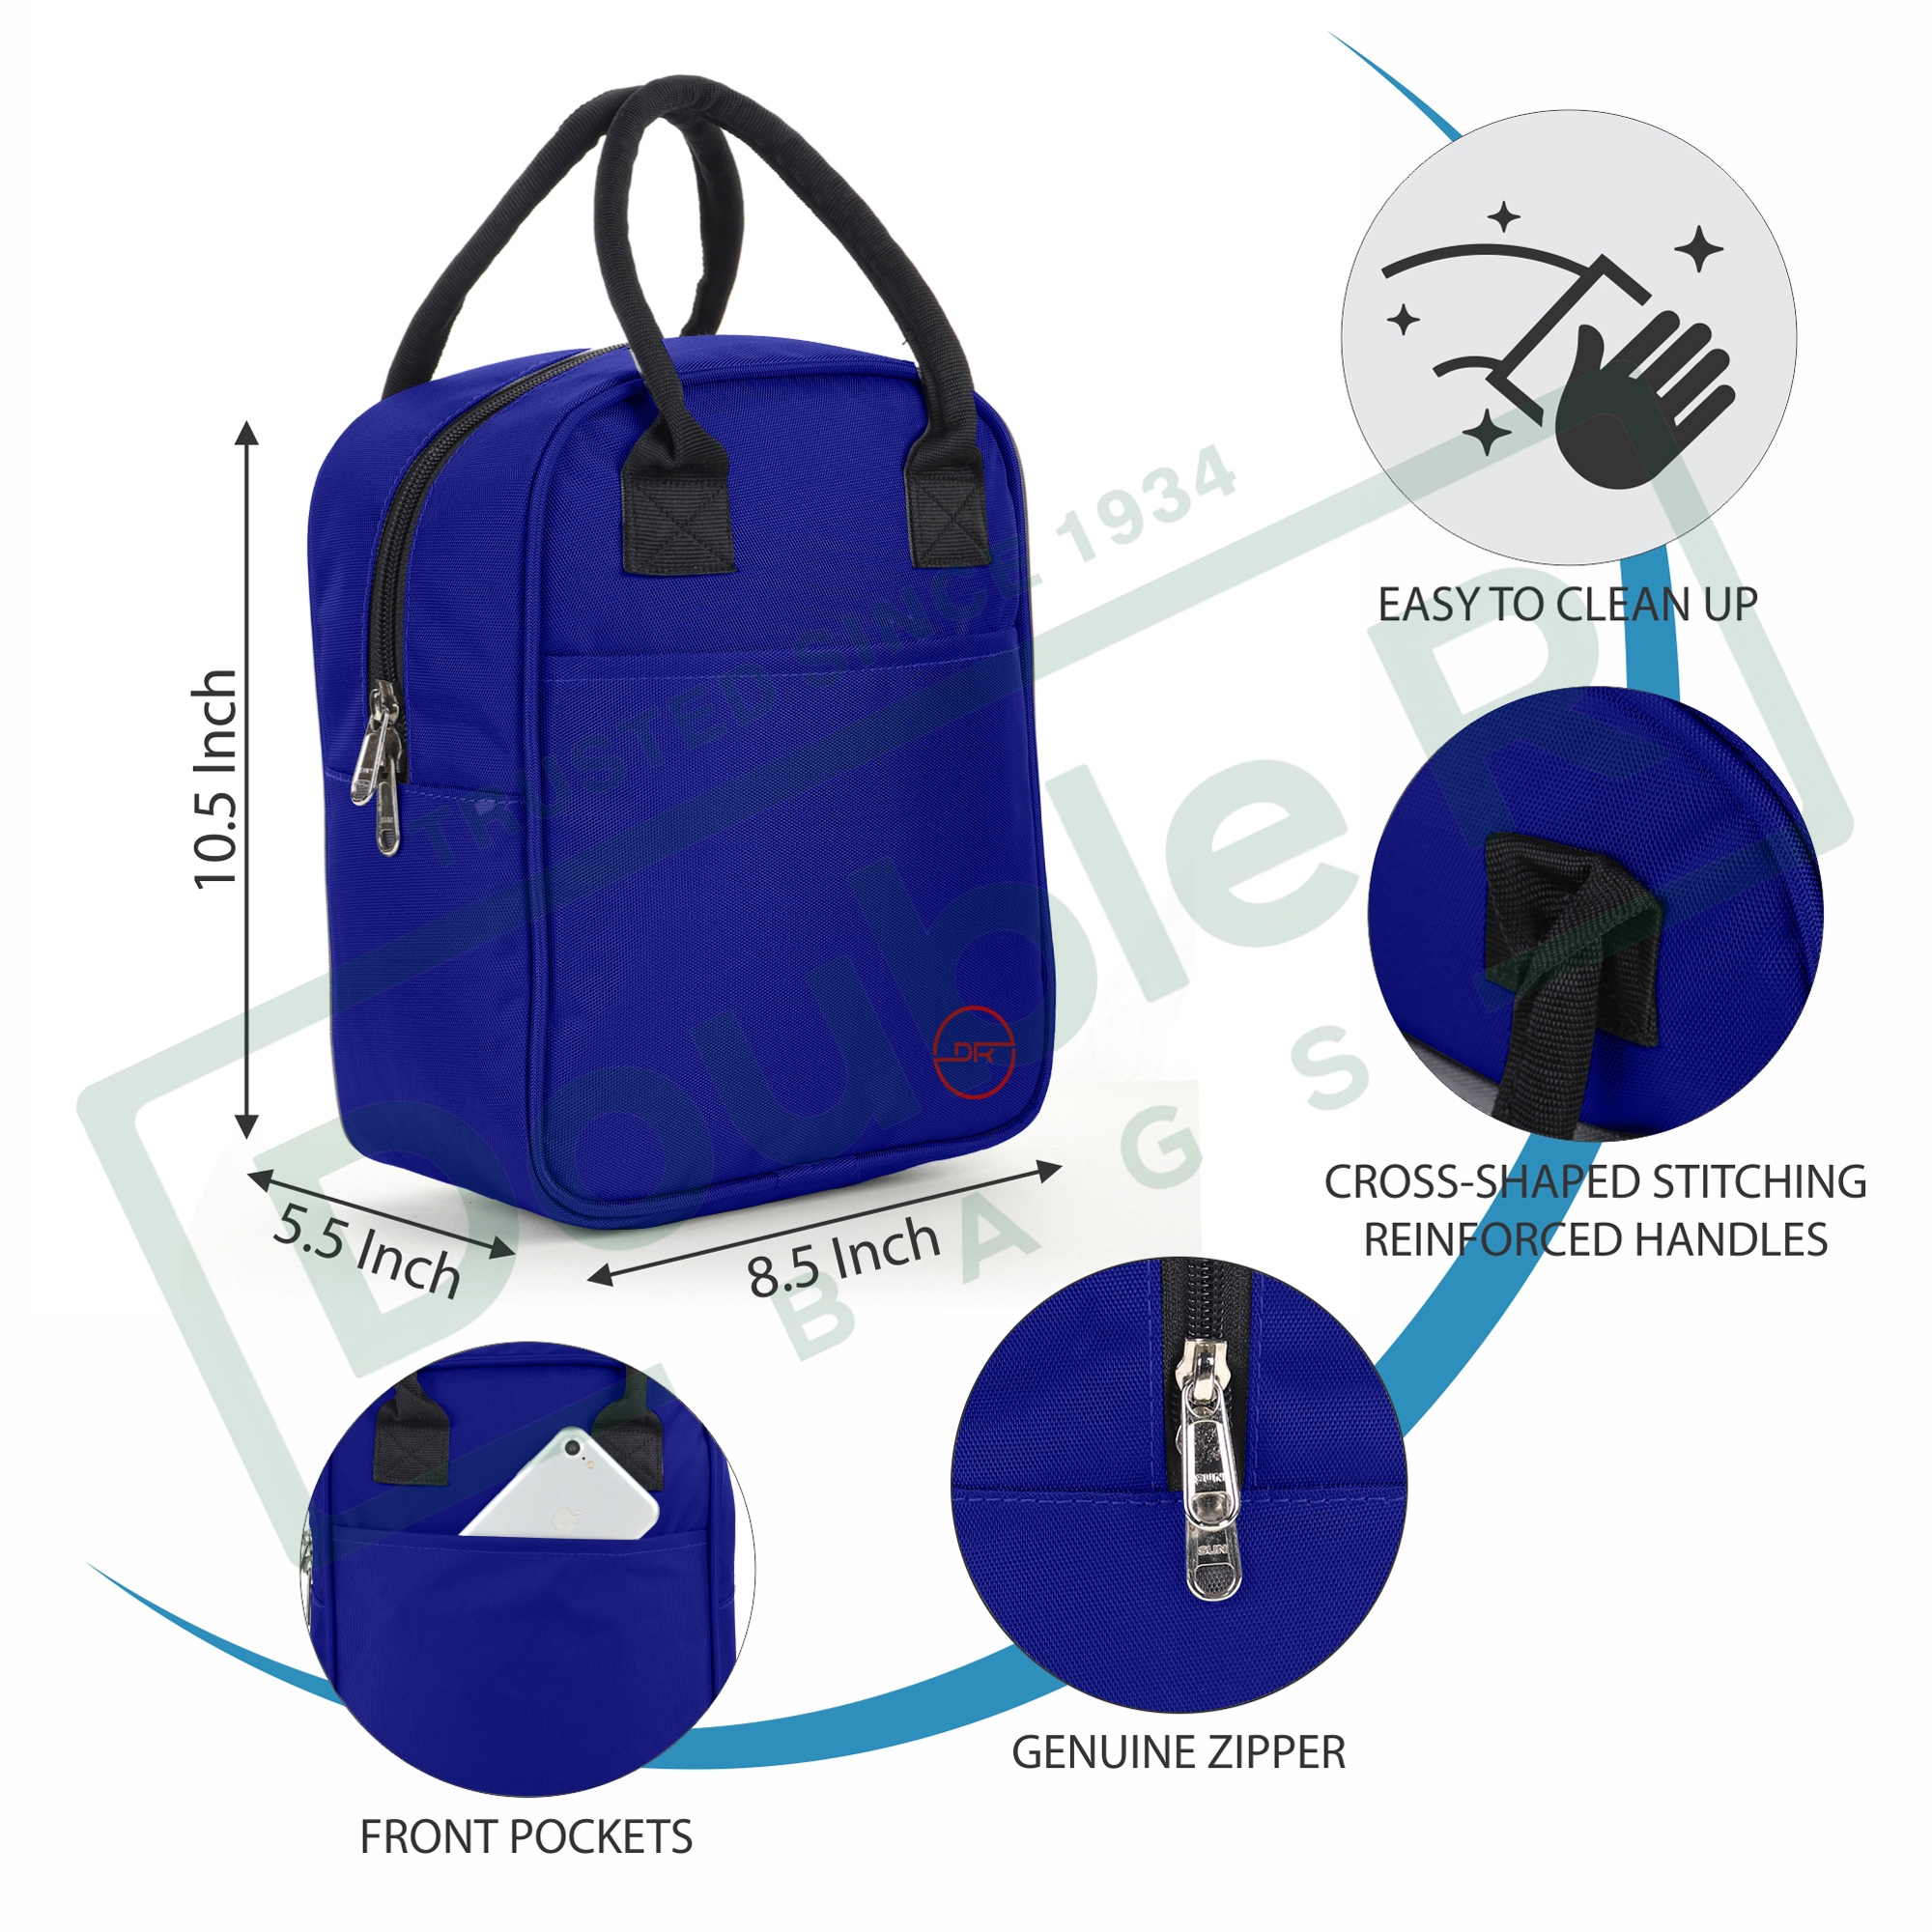 DOUBLE R BAGS | Double R Bags Insulated Lunch Bag for Office Men, Women and Kids, Tiffin Bags for School, Picnic, Work, Carry Bag for Lunch Box (Royal Blue) 0